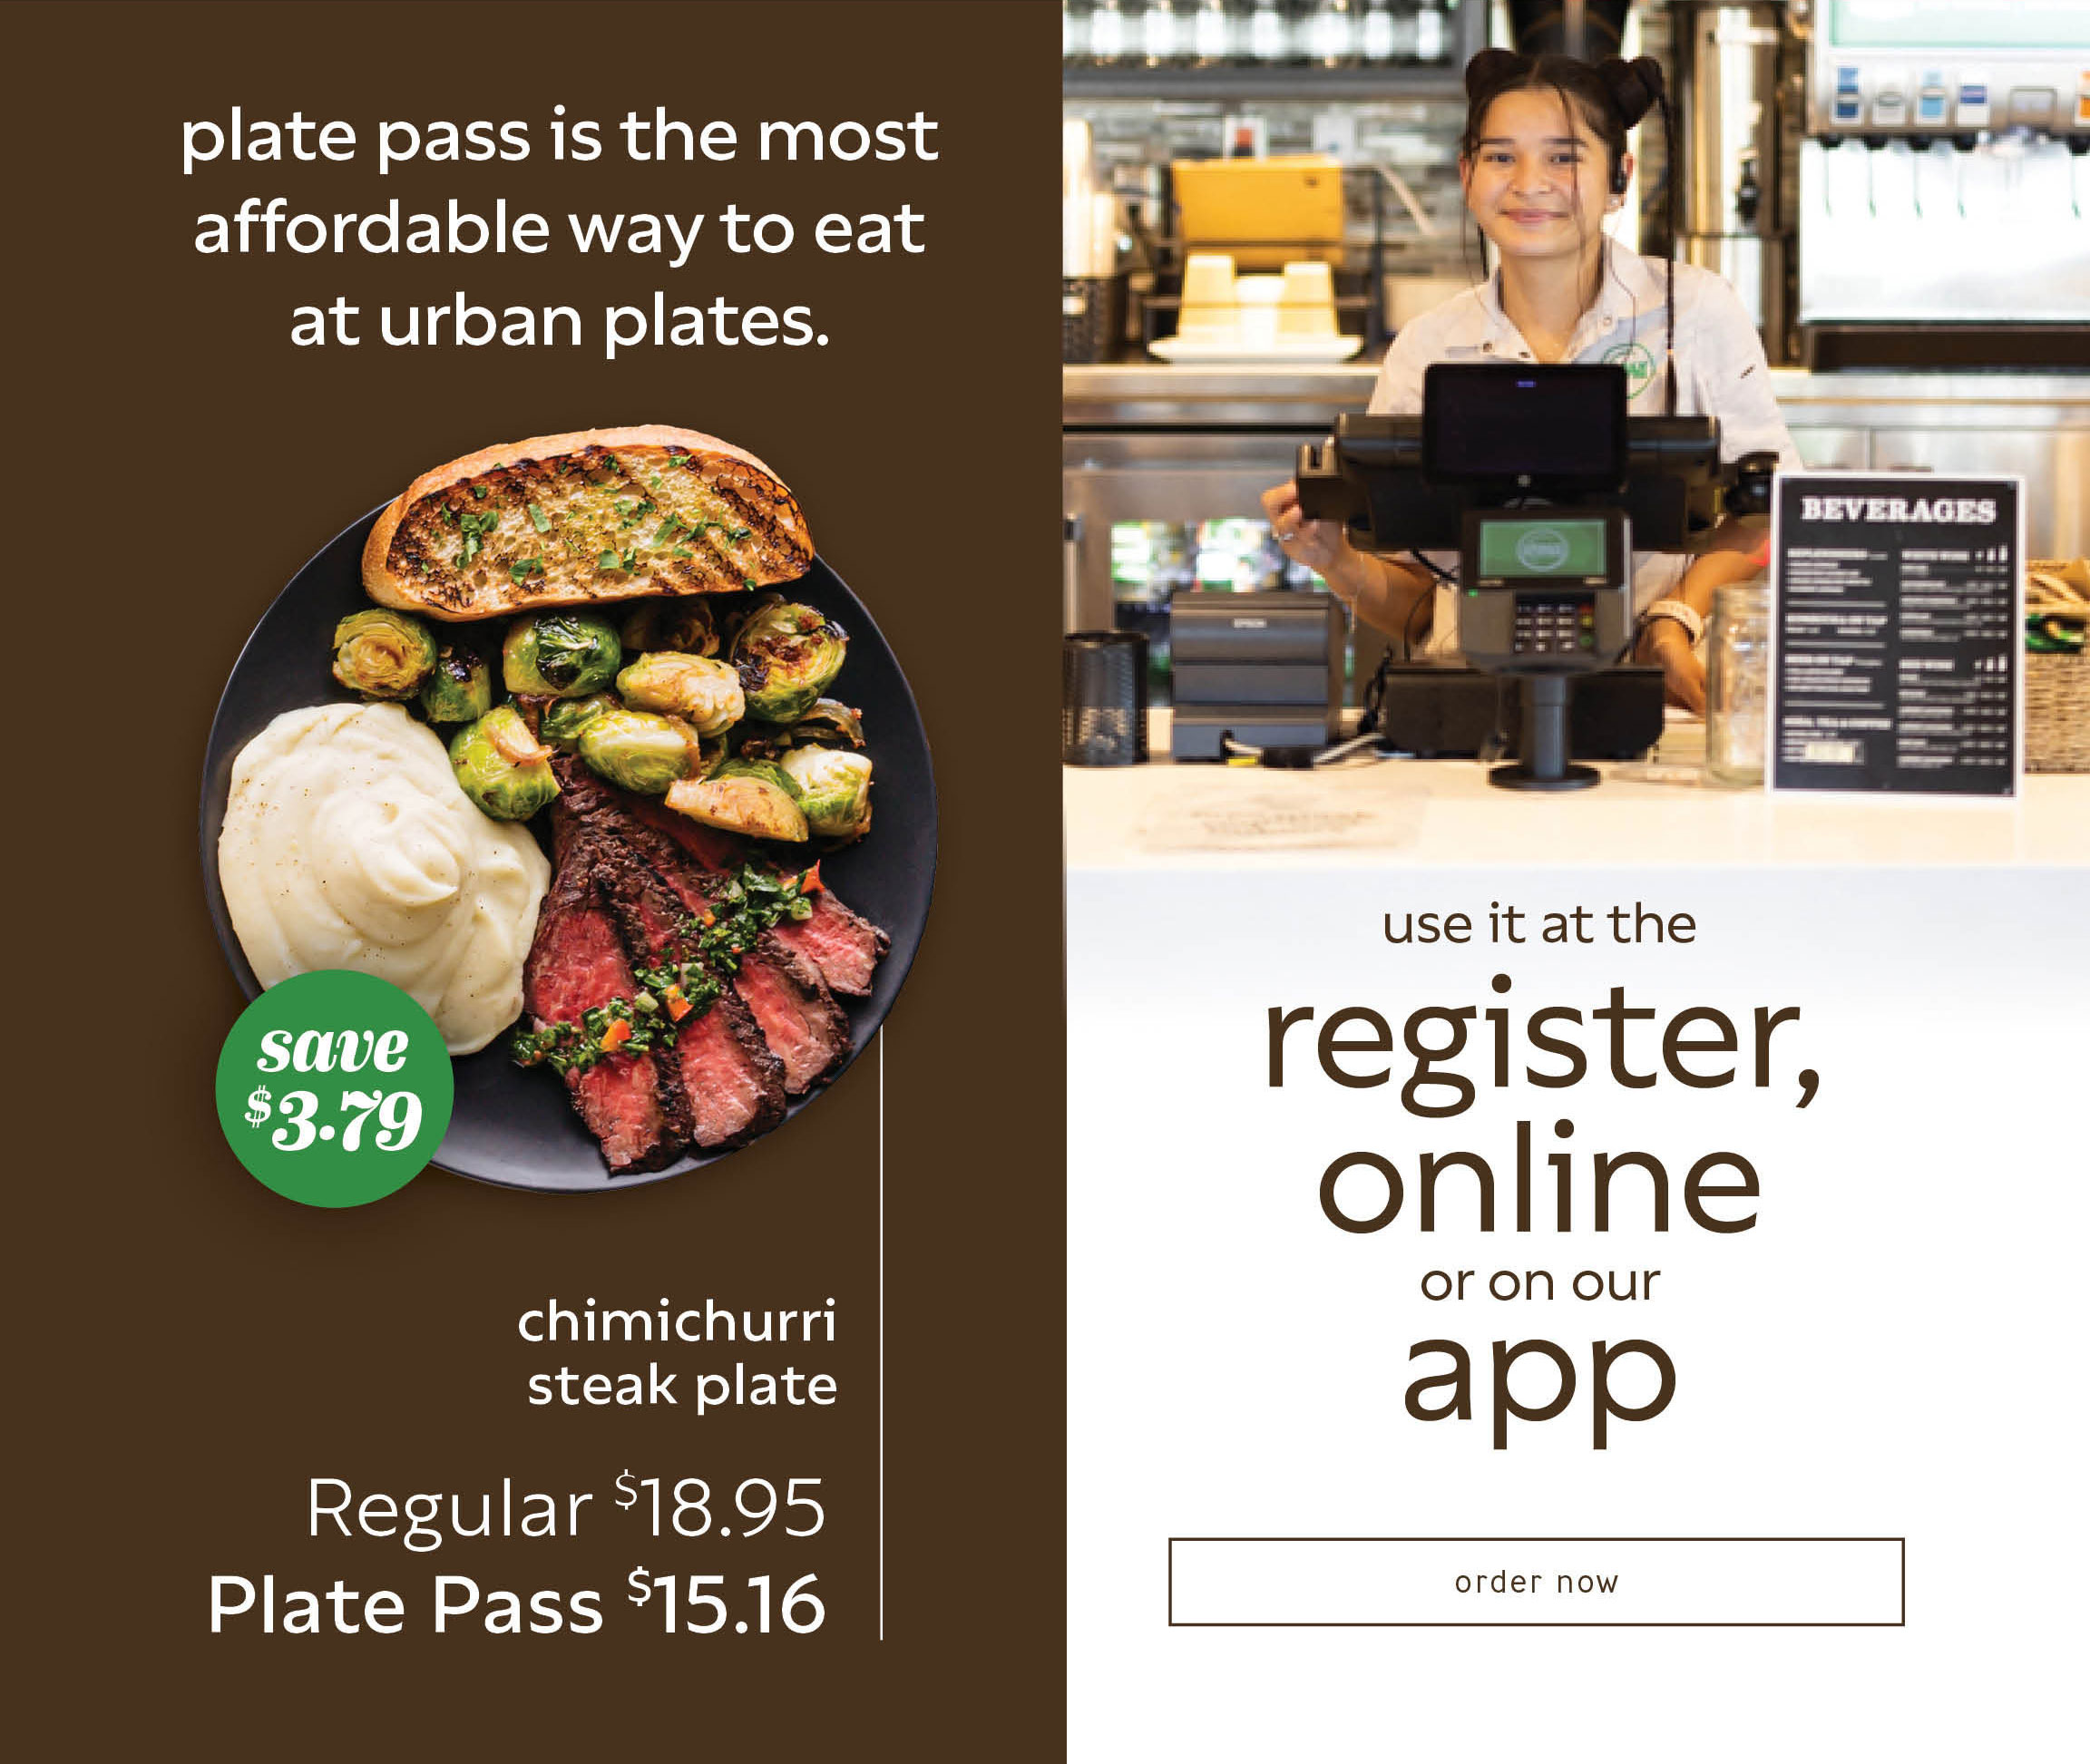 plate pass is the most affordable way to eat at urban plates